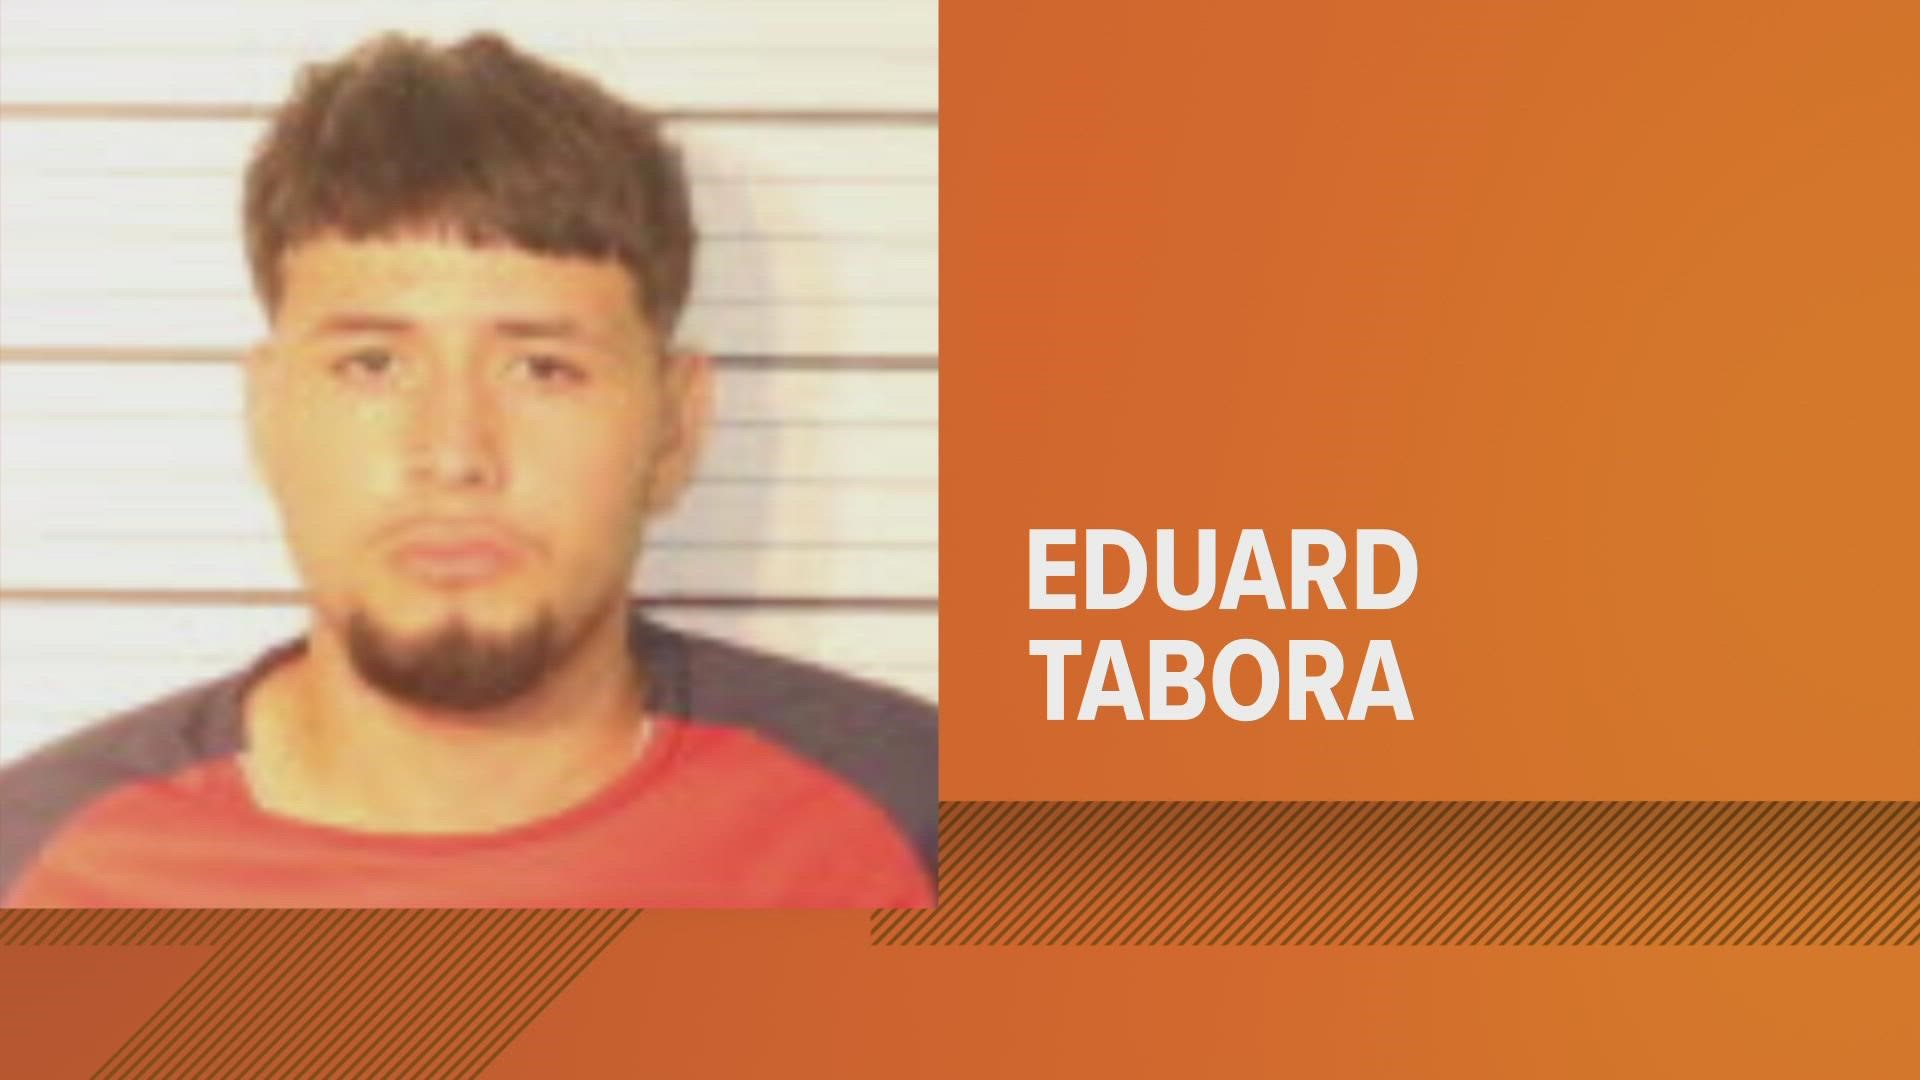 20-year-old Eduard Rodriguez Tabora, charged with first-degree murder in the killing of Reverend Autura Eason-Williams in July, is the oldest of the three suspects.